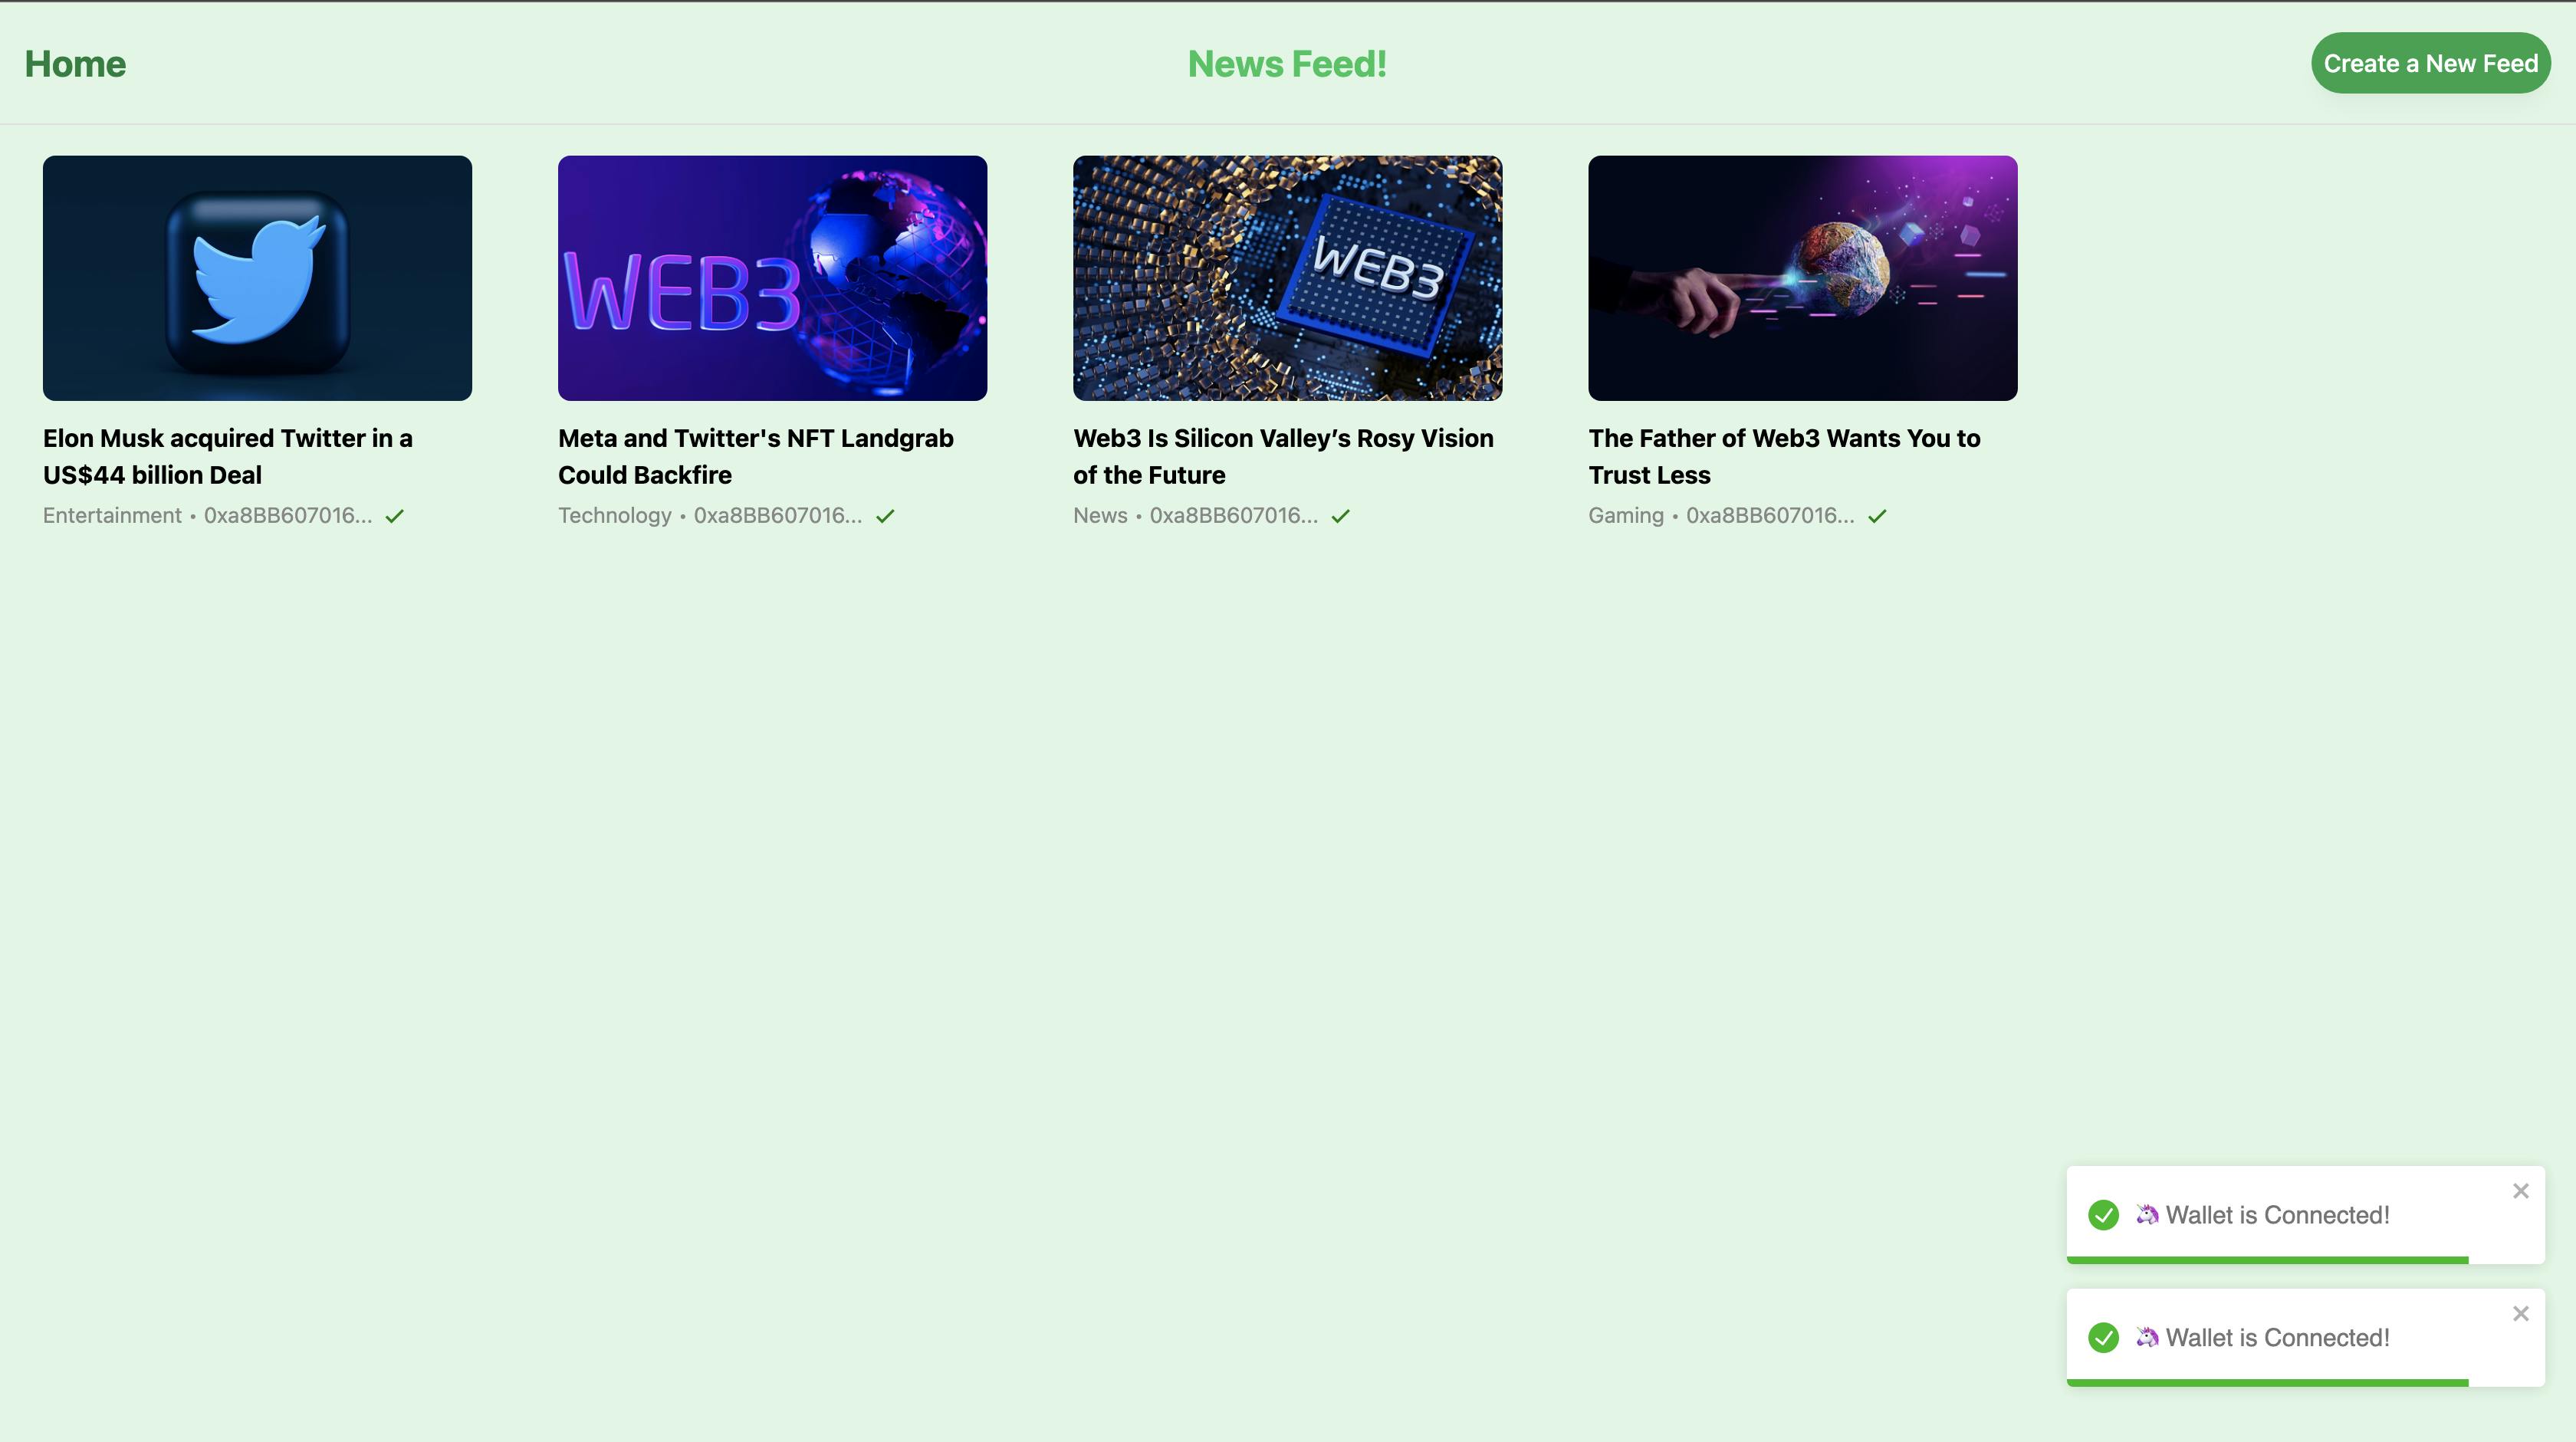 Build a Decentralized News Feed using Reactjs, TailwindCSS, Etherjs, IPFS & Solidity